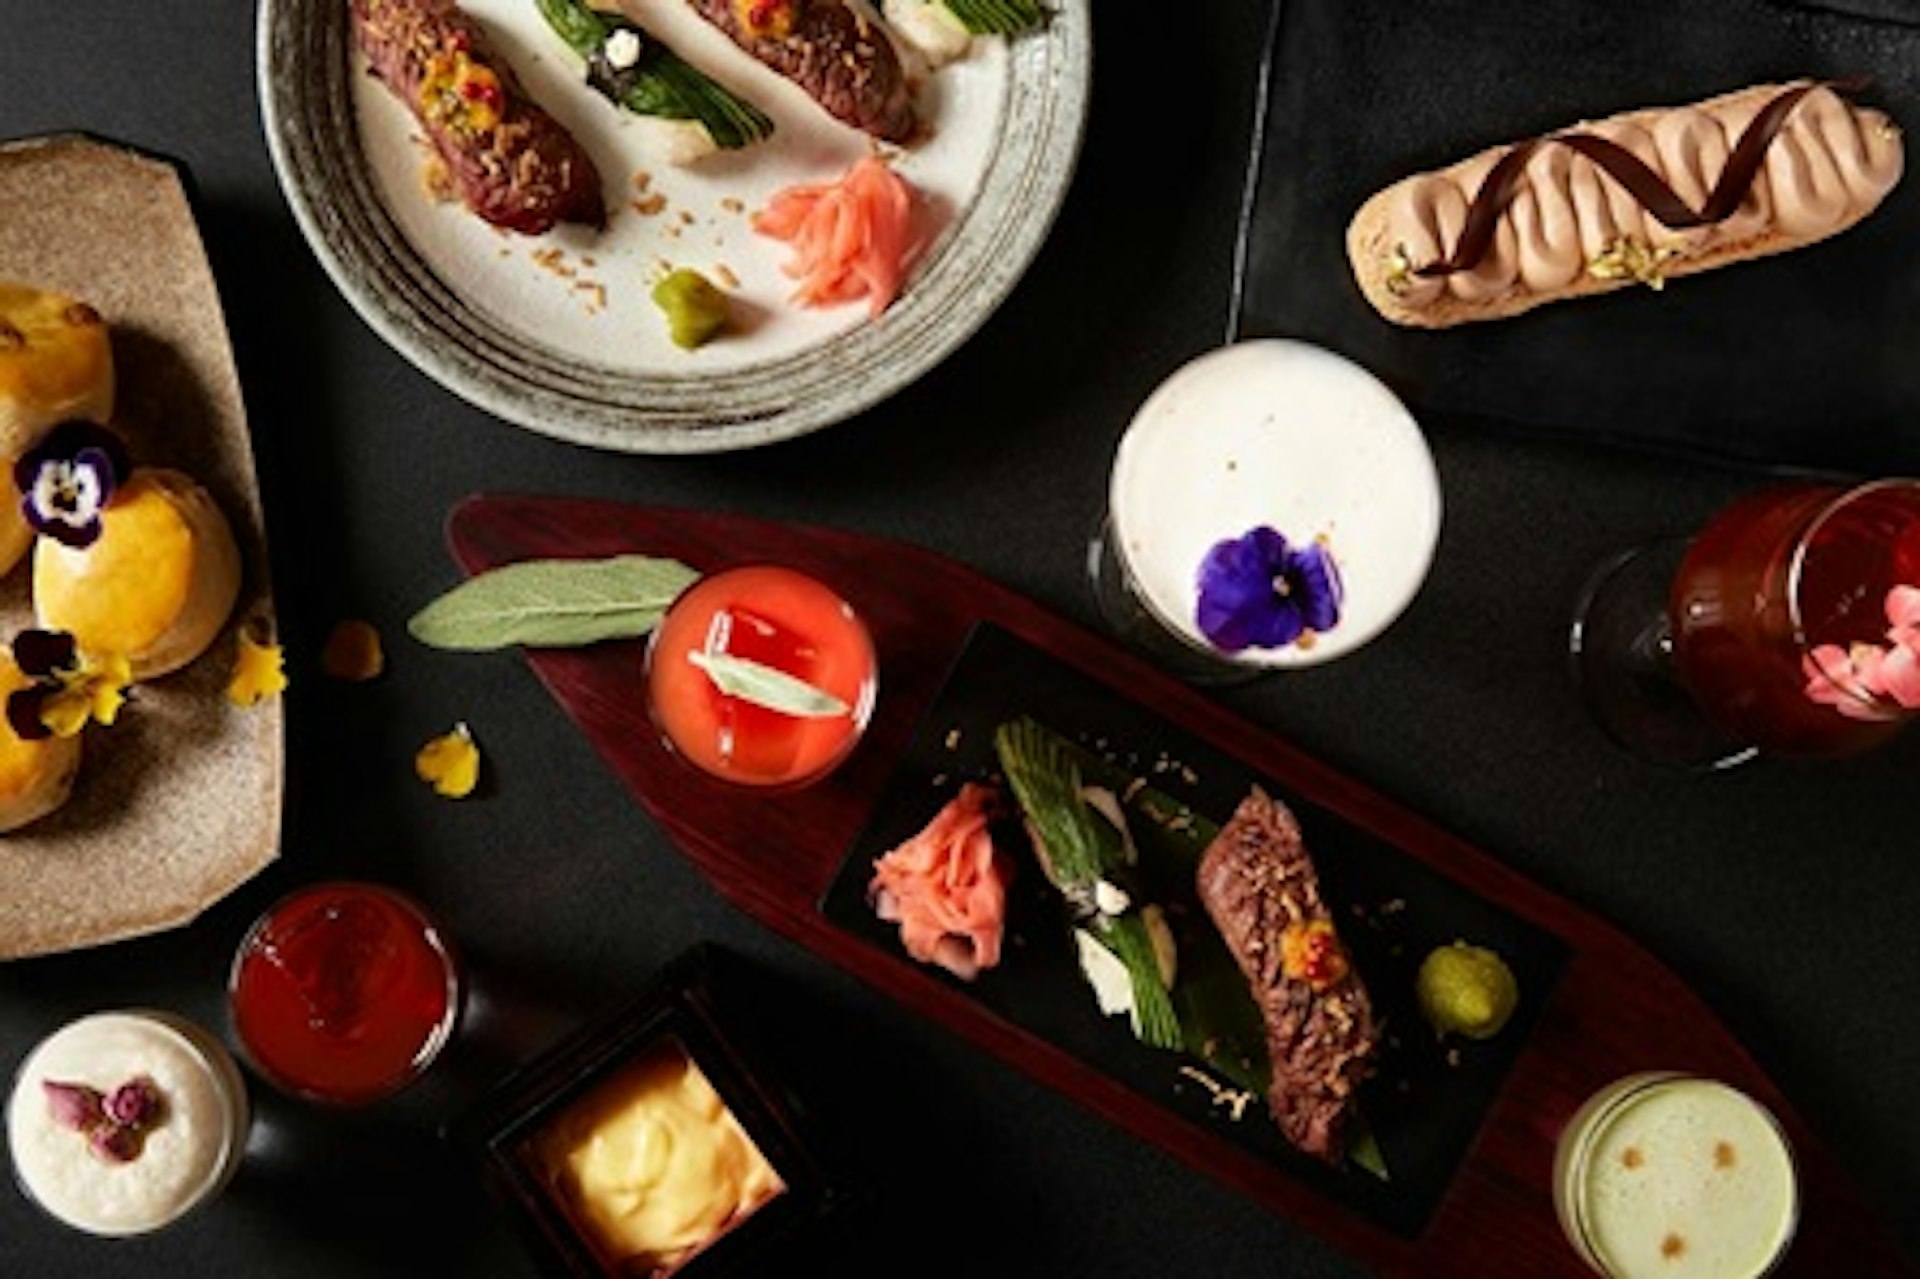 Liquid Afternoon Tea for Two at Gong within the 5* Luxury Shangri-La at The Shard, London 2